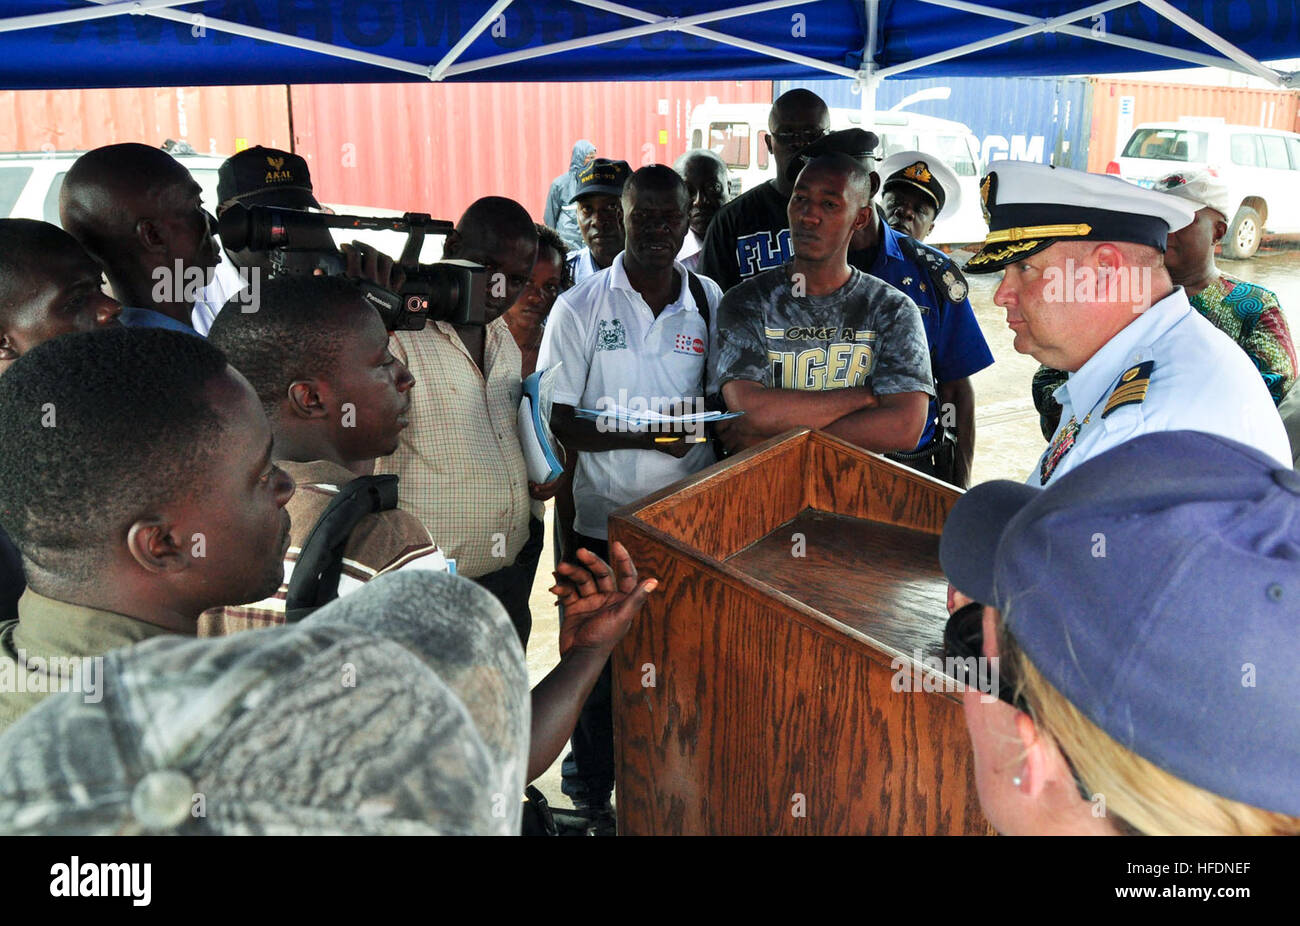 Cmdr. Robert T. Hendrickson, commanding officer of U.S. Coast Guard Cutter Mohawk (WMEC 913), speaks to local media during a press conference on the pier during a port visit to Freetown. Mohawk recently participated in the African Maritime Law Enforcement Partnership, a mission that focuses on enhancing cooperative partnerships with regional maritime services to achieve common international goals such as stability and security. Mohawk, homeported in Key West, Fla., is on a scheduled deployment in the U.S. 6th Fleet area of responsibility. (Photo by: Petty Officer 1st Class Daniel P. Lapierre)  Stock Photo